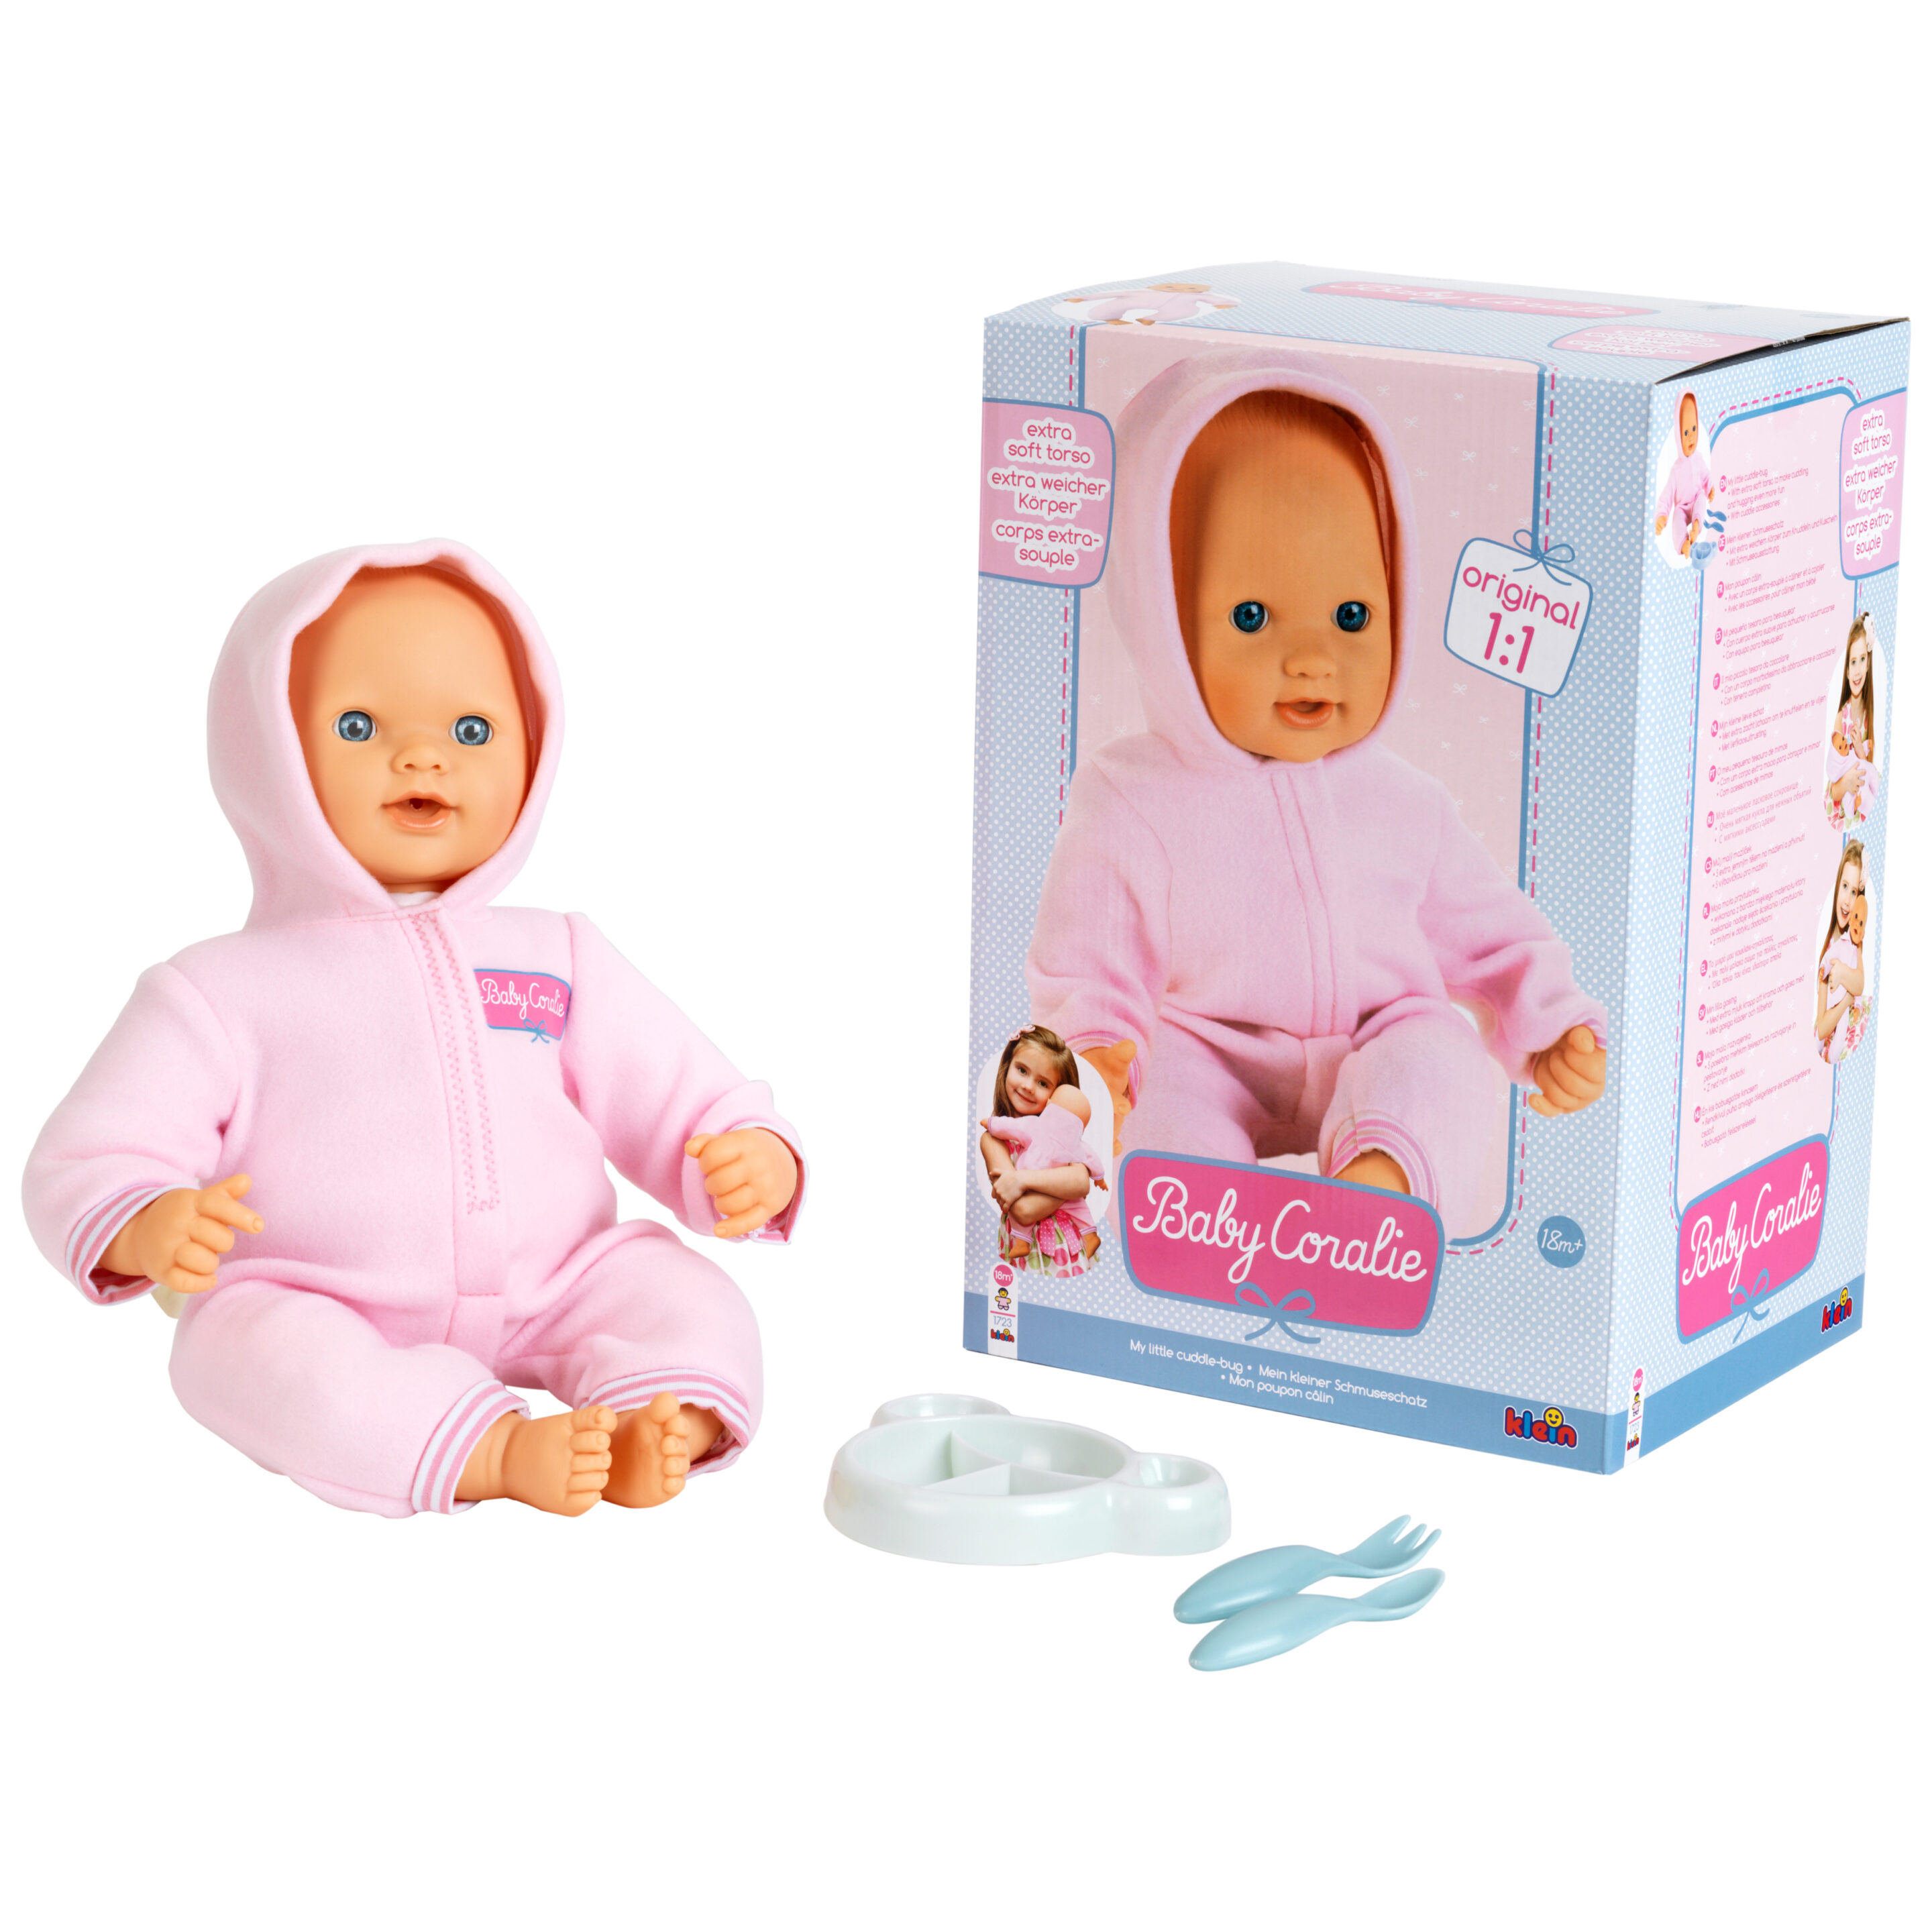 Baby Coralie - Cuddly Baby Doll